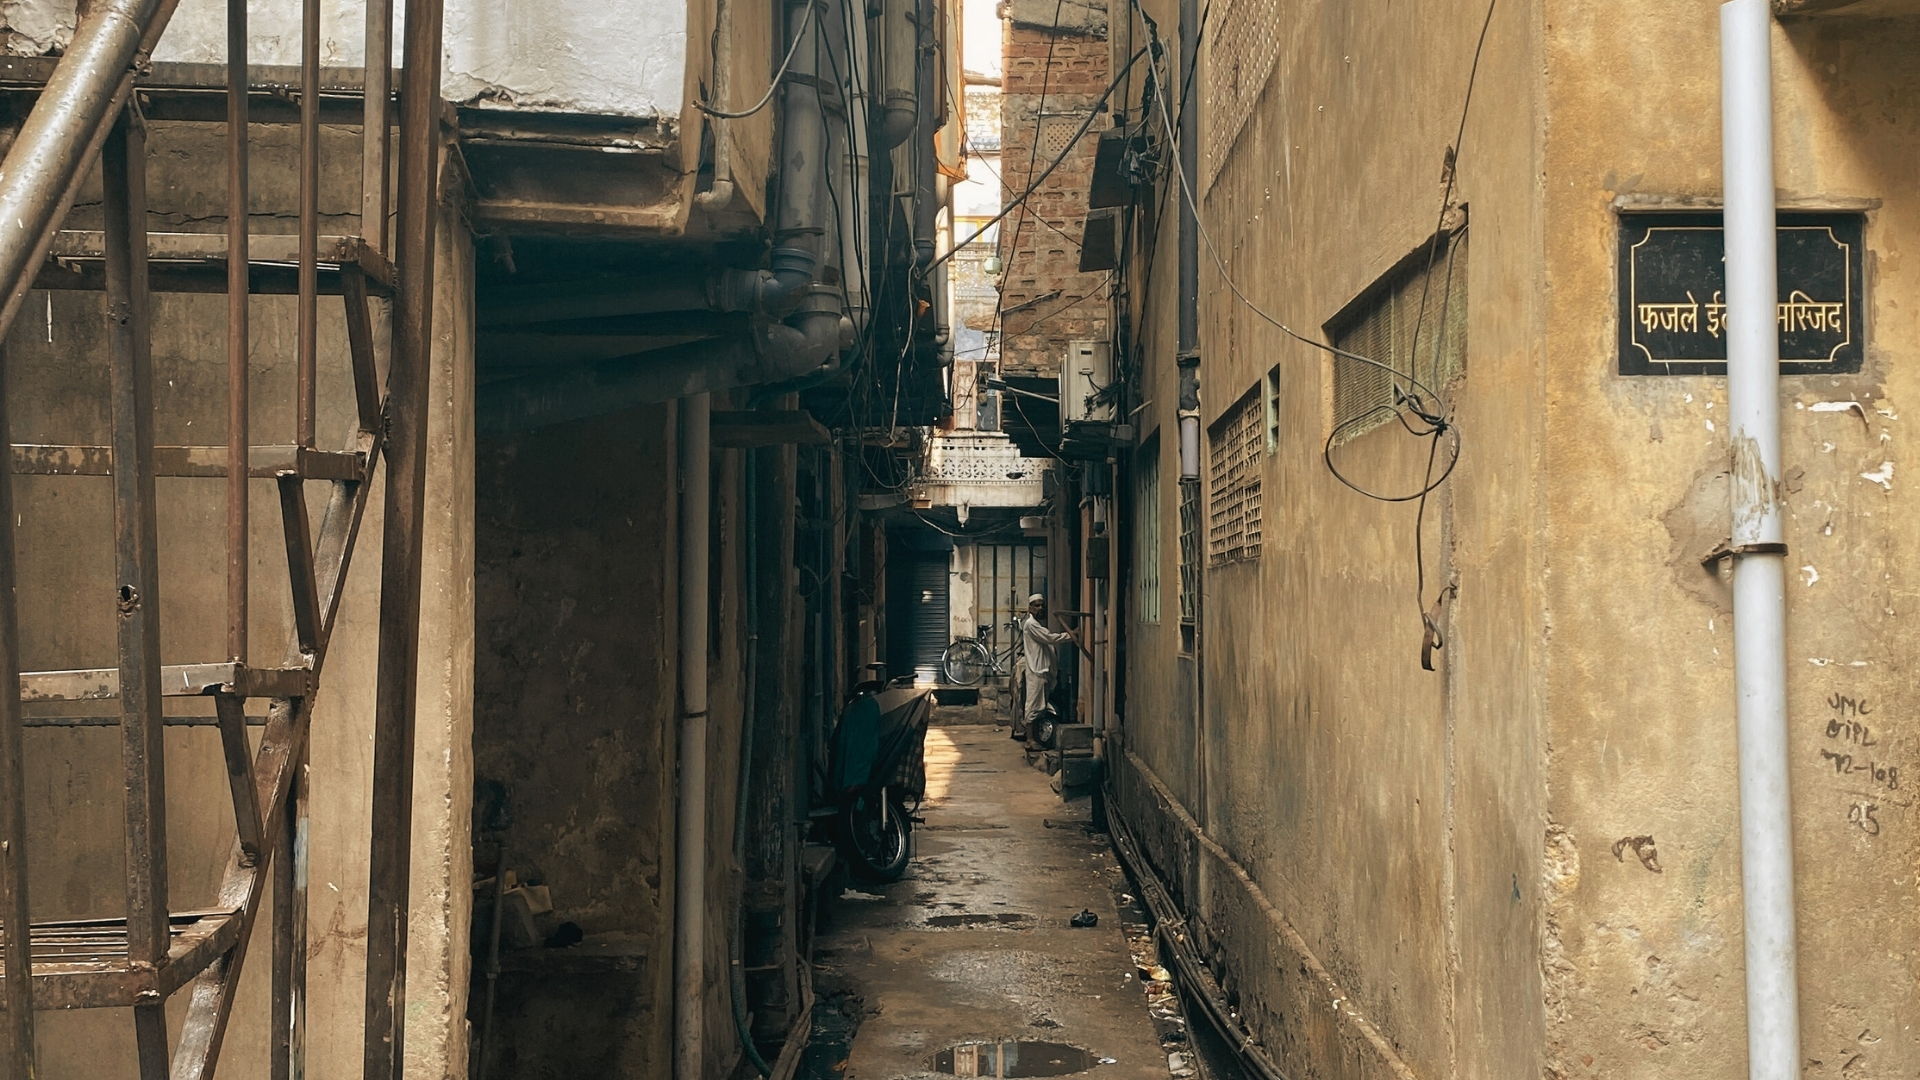 Restricted Passageways: Narrow Lanes Impede Movement and Accessibility